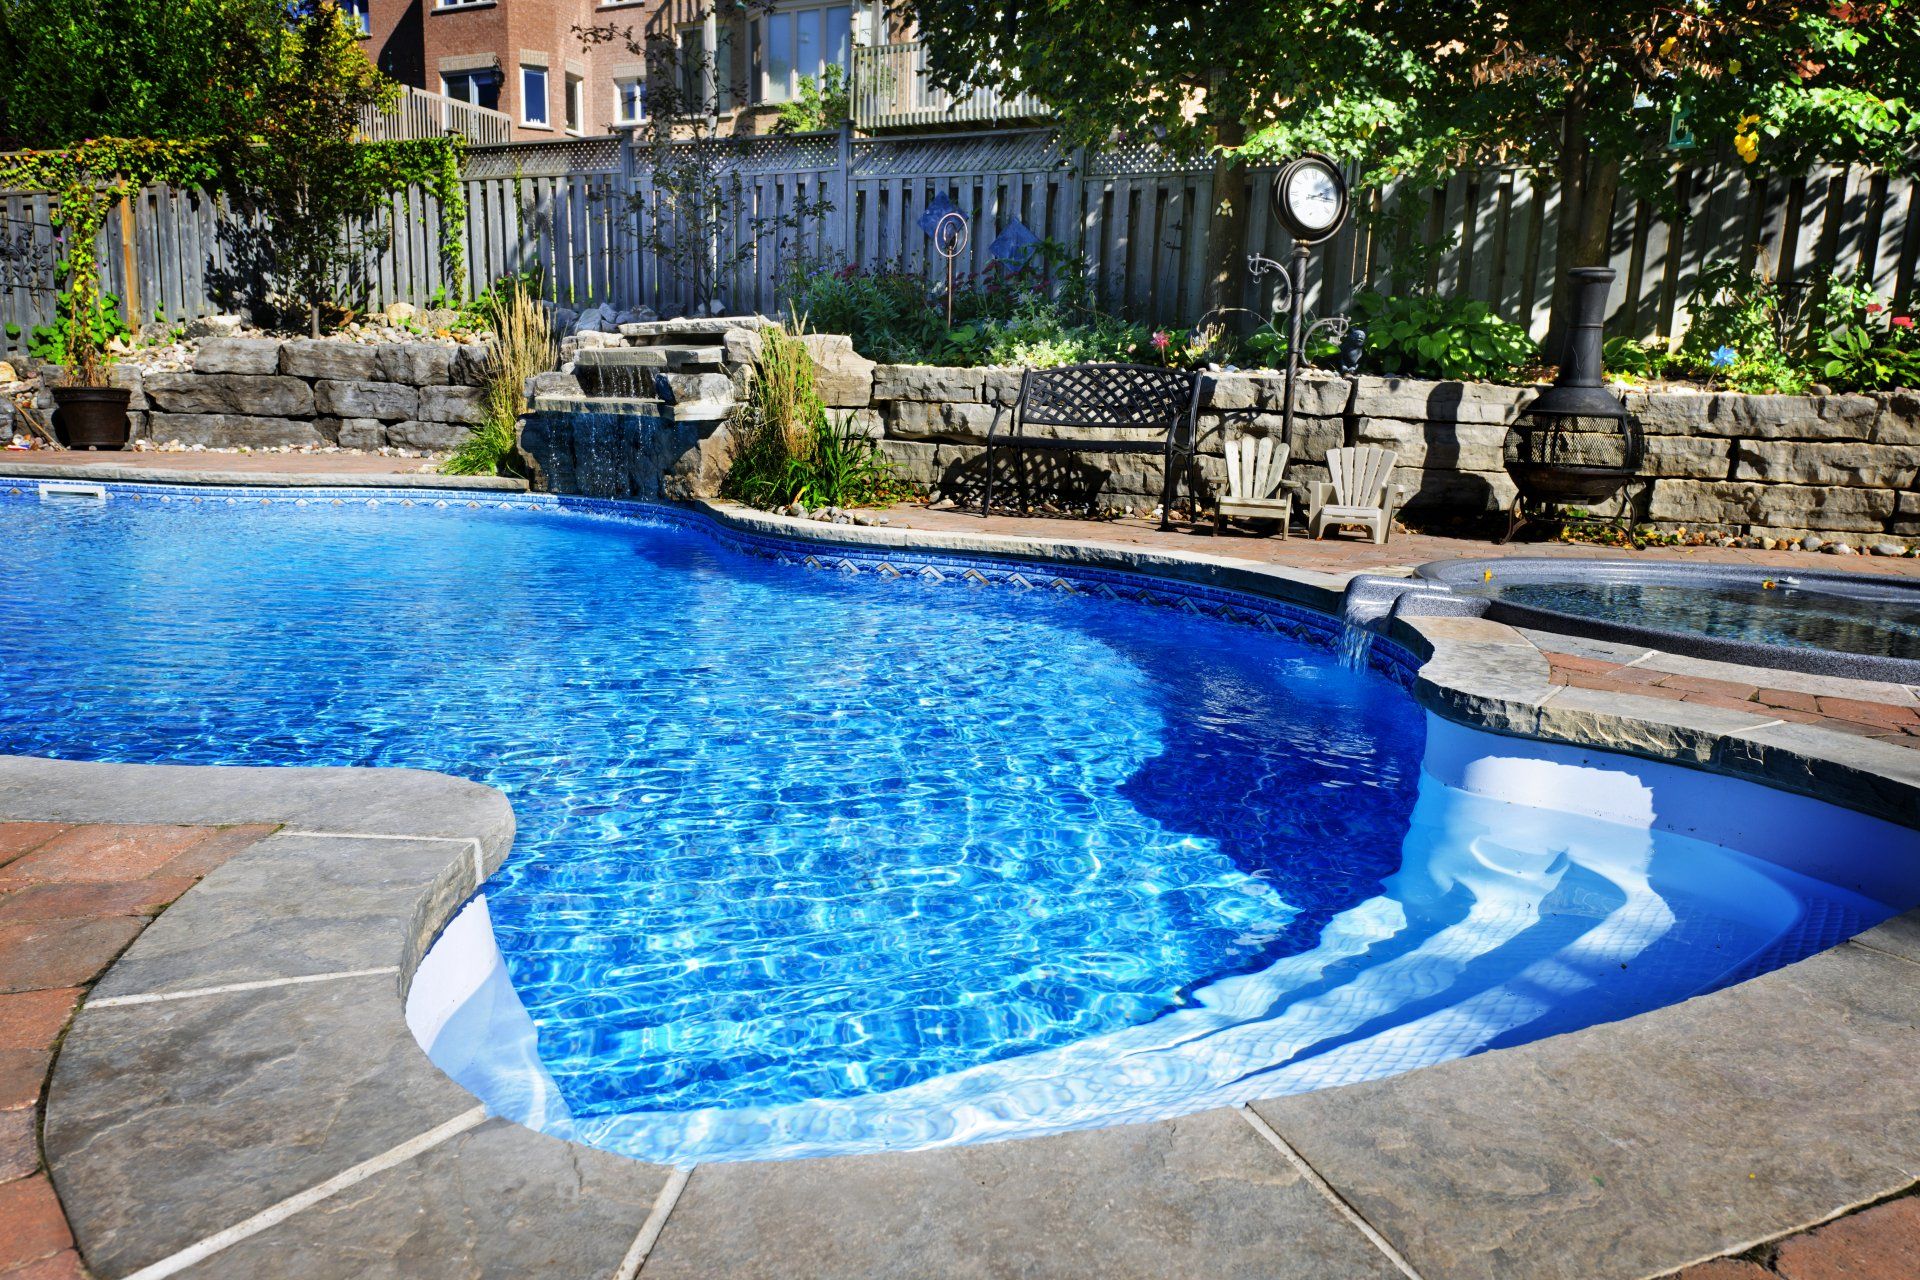 Pool serviced by all county pool service